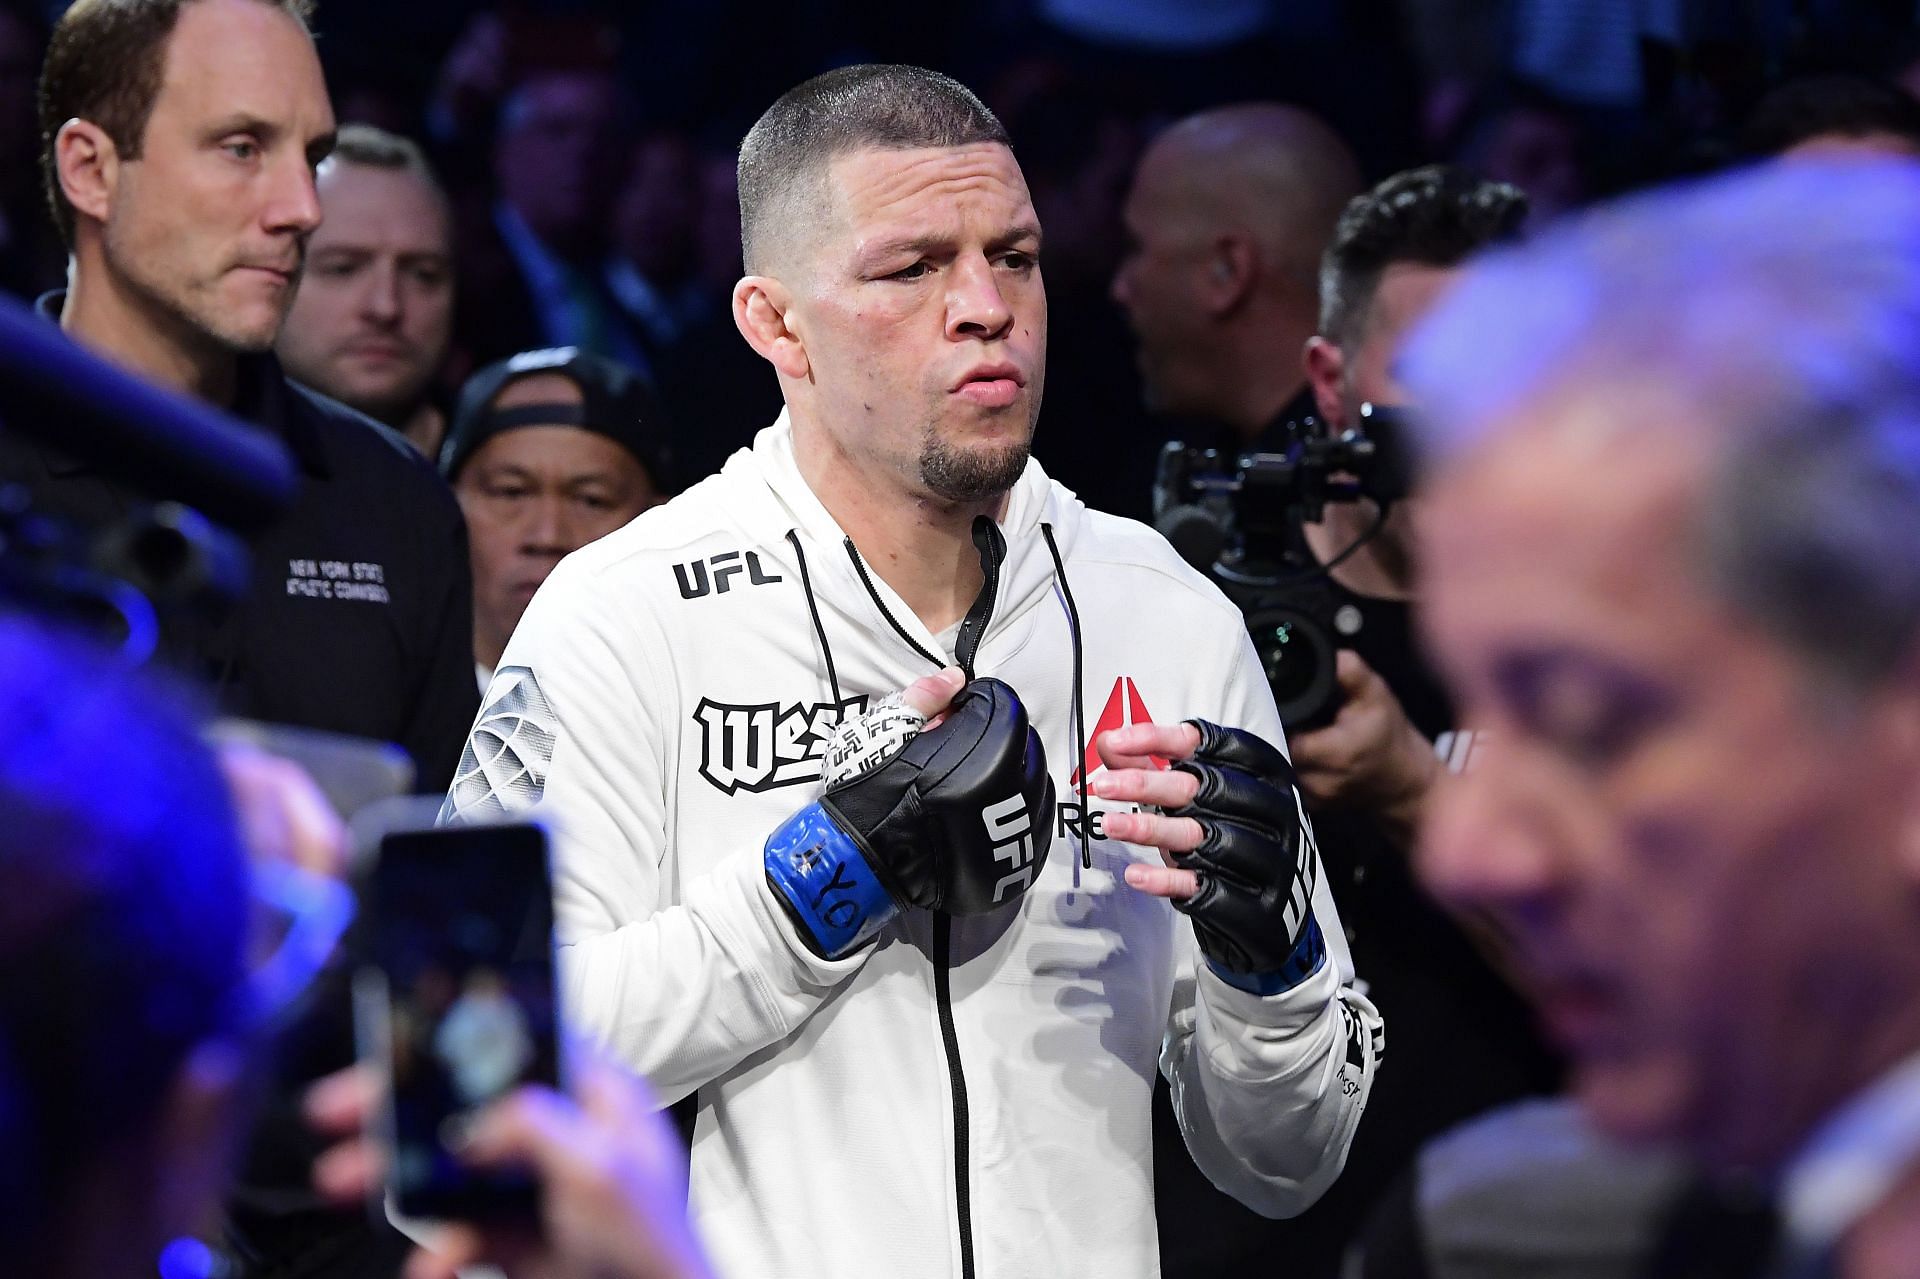 With just one fight remaining on his contract, Nate Diaz has asked the UFC to let him go